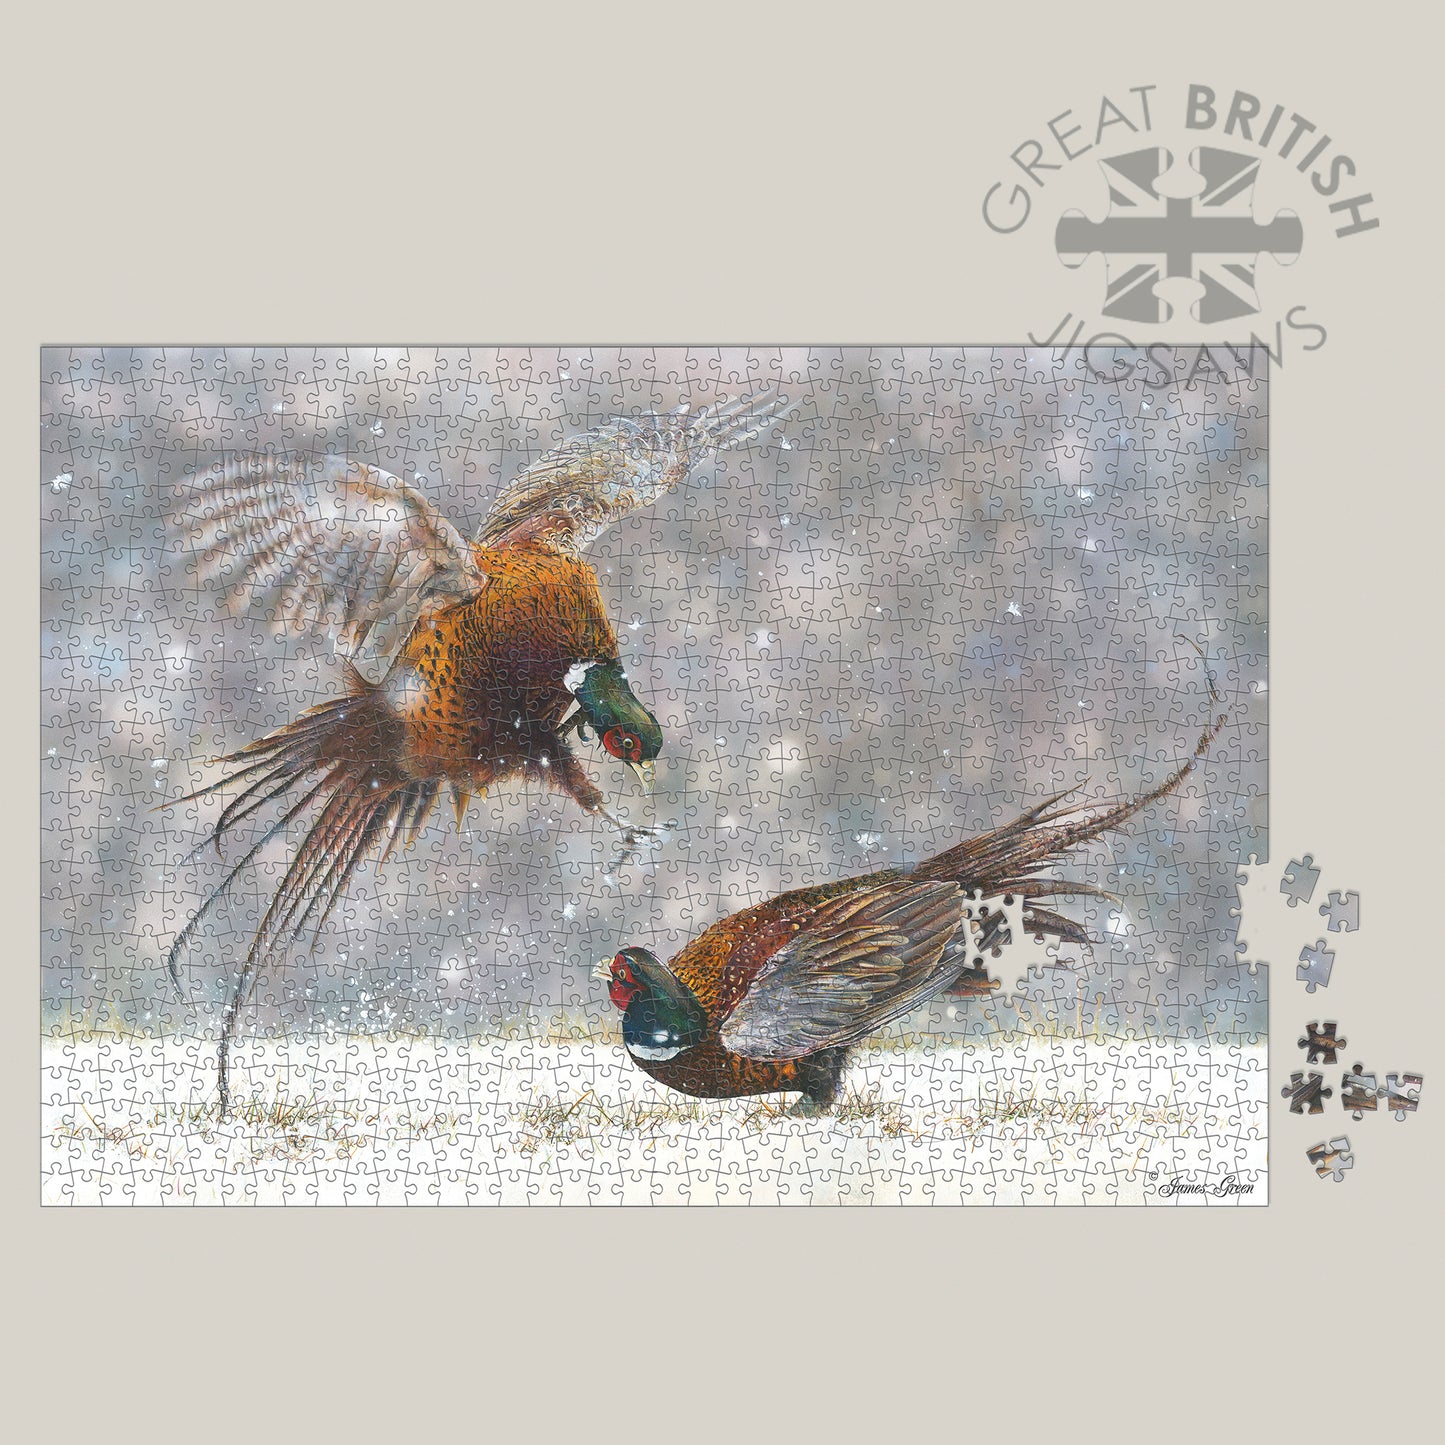 Pheasants fighting on a 1000 piece jigsaw puzzle